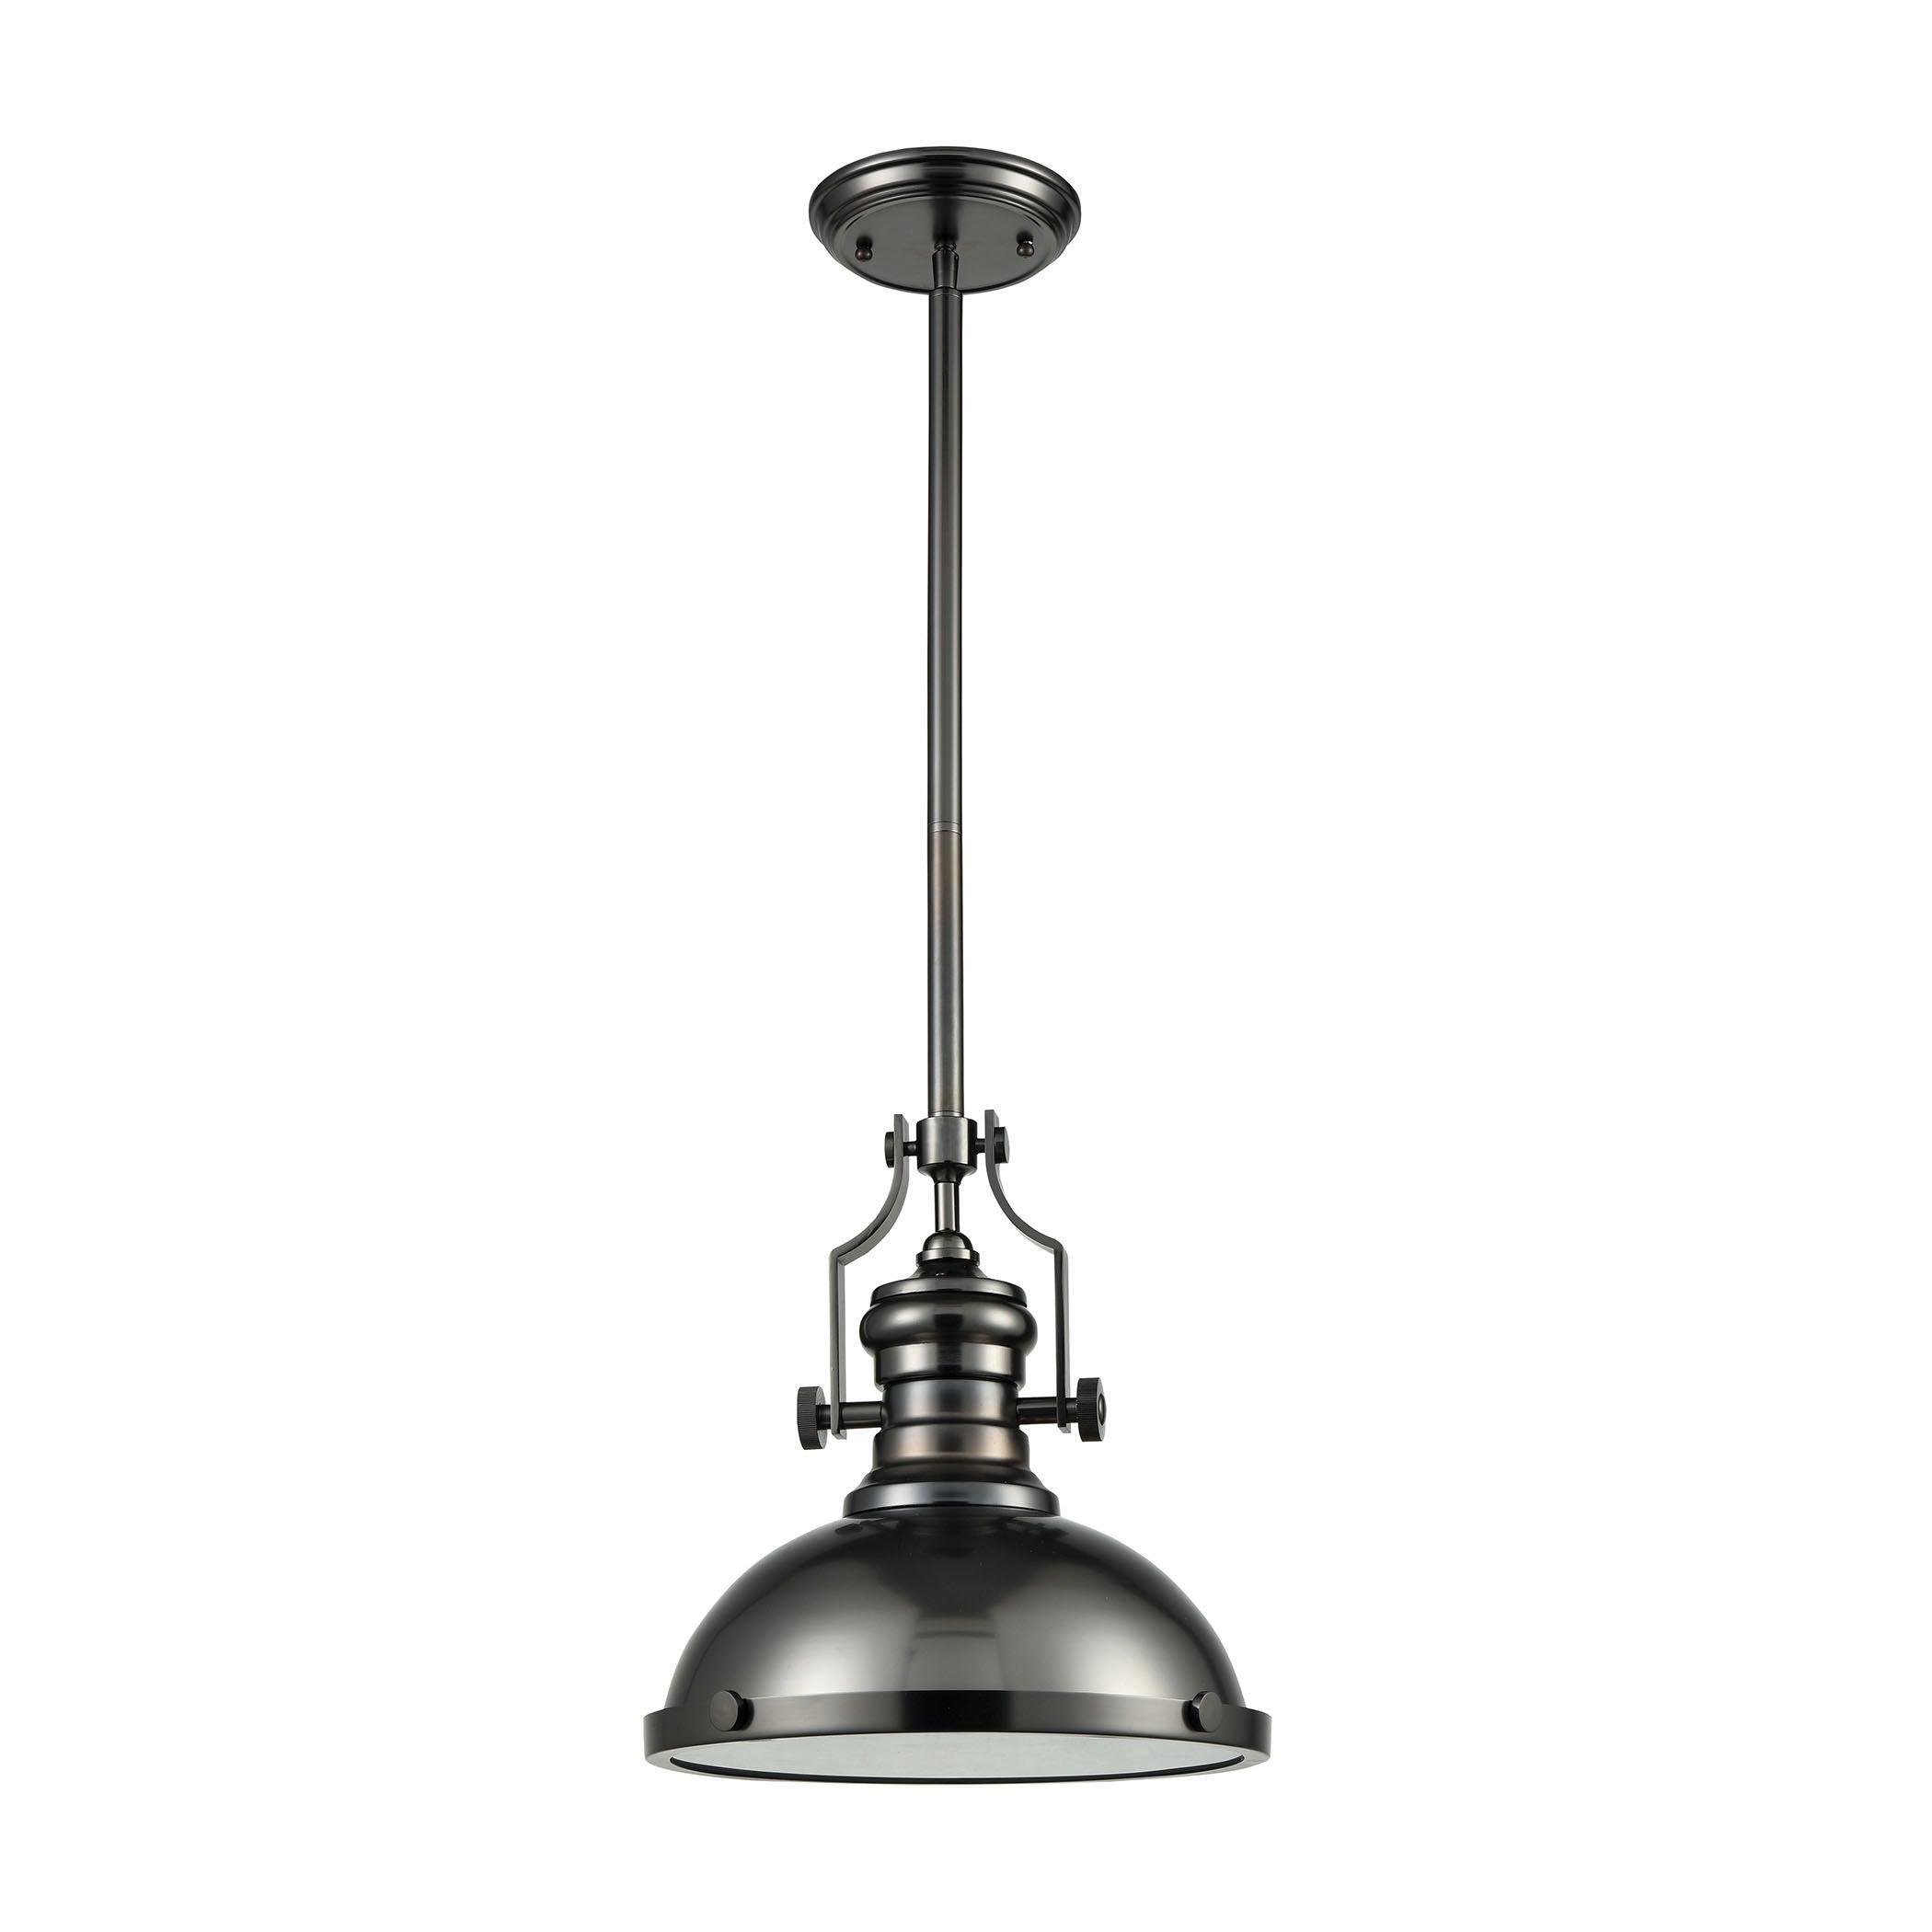 ELK Lighting 66604-1 Chadwick 3-Light Pendant in Black Nickel with Metal Shade and Frosted Glass Diffuser